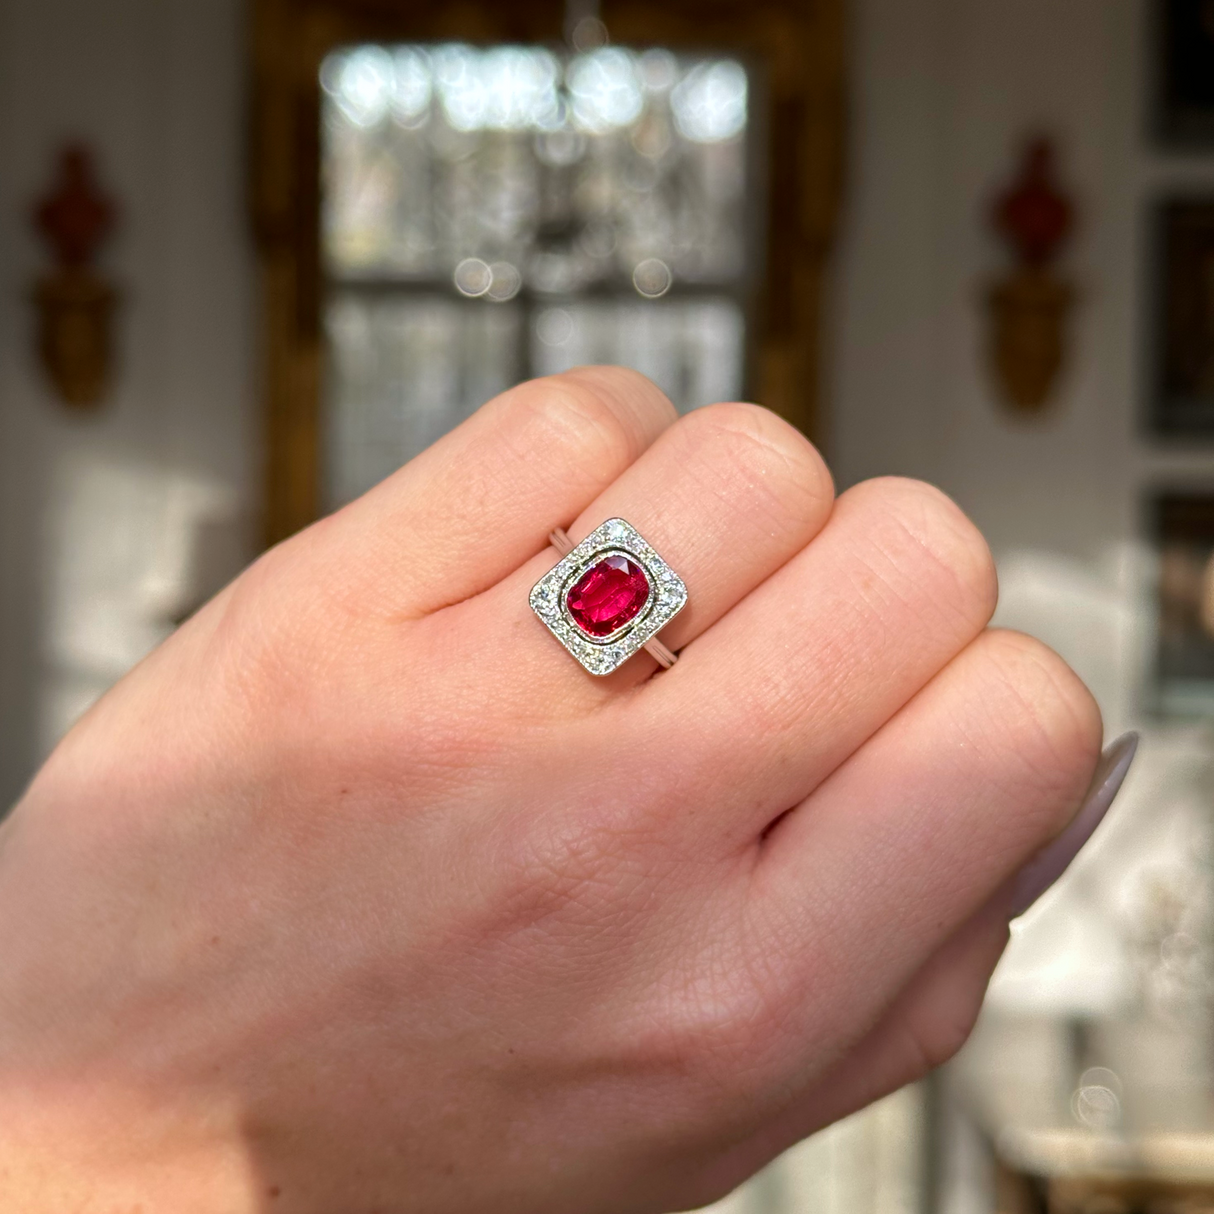 Vintage Art Deco ruby and diamond engagement ring worn on closed hand.